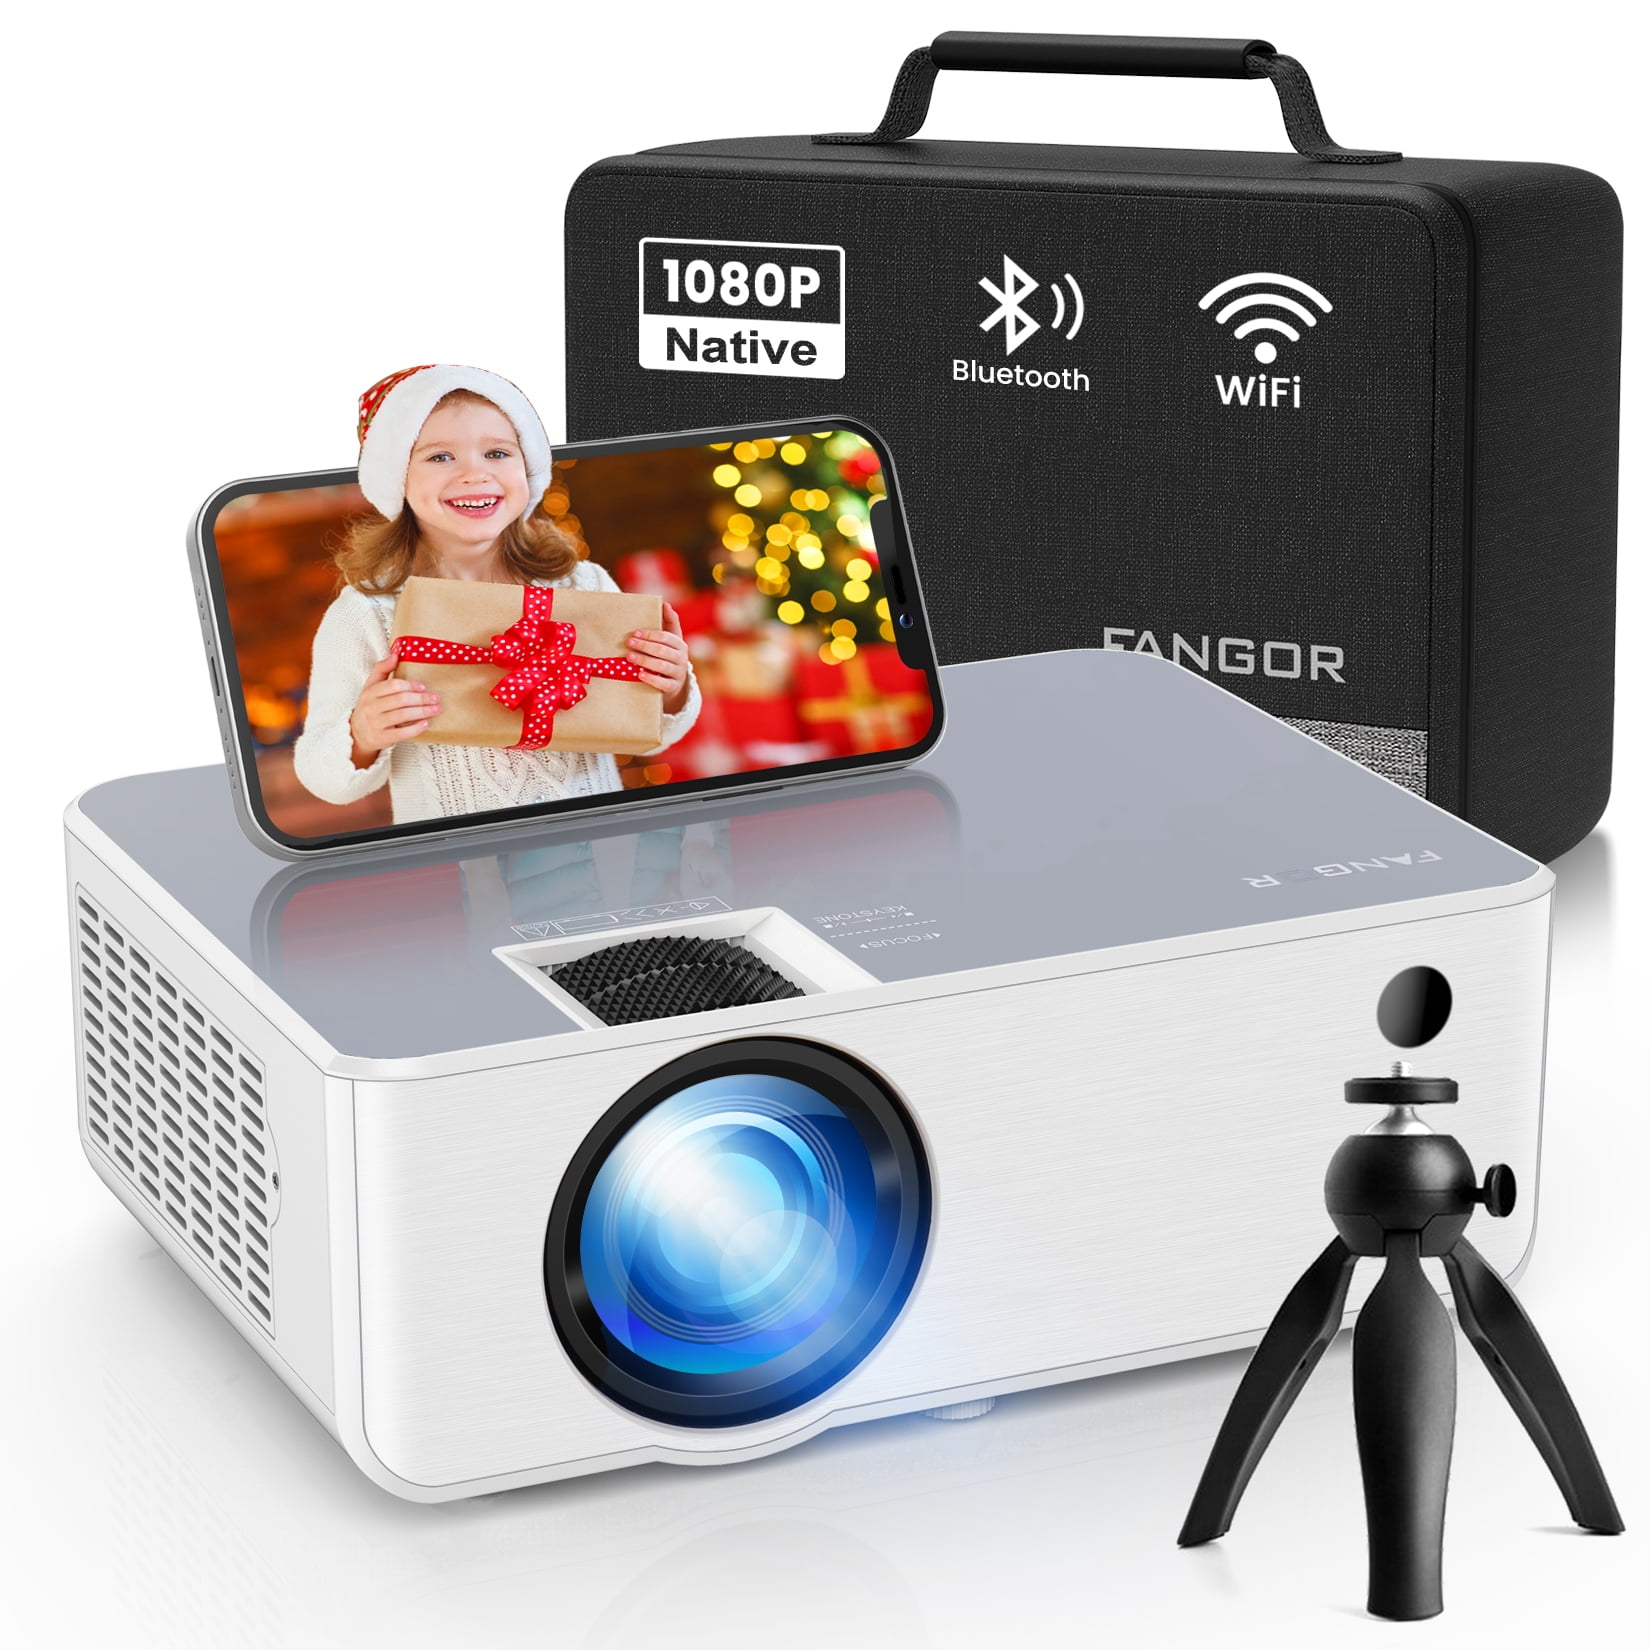 bruiloft site Skalk FANGOR Full HD Movie Projector, Native 1080P Projector with 230" Projection  Size, Support HDMI VGA AV USB with Free Carrying Bag - Walmart.com